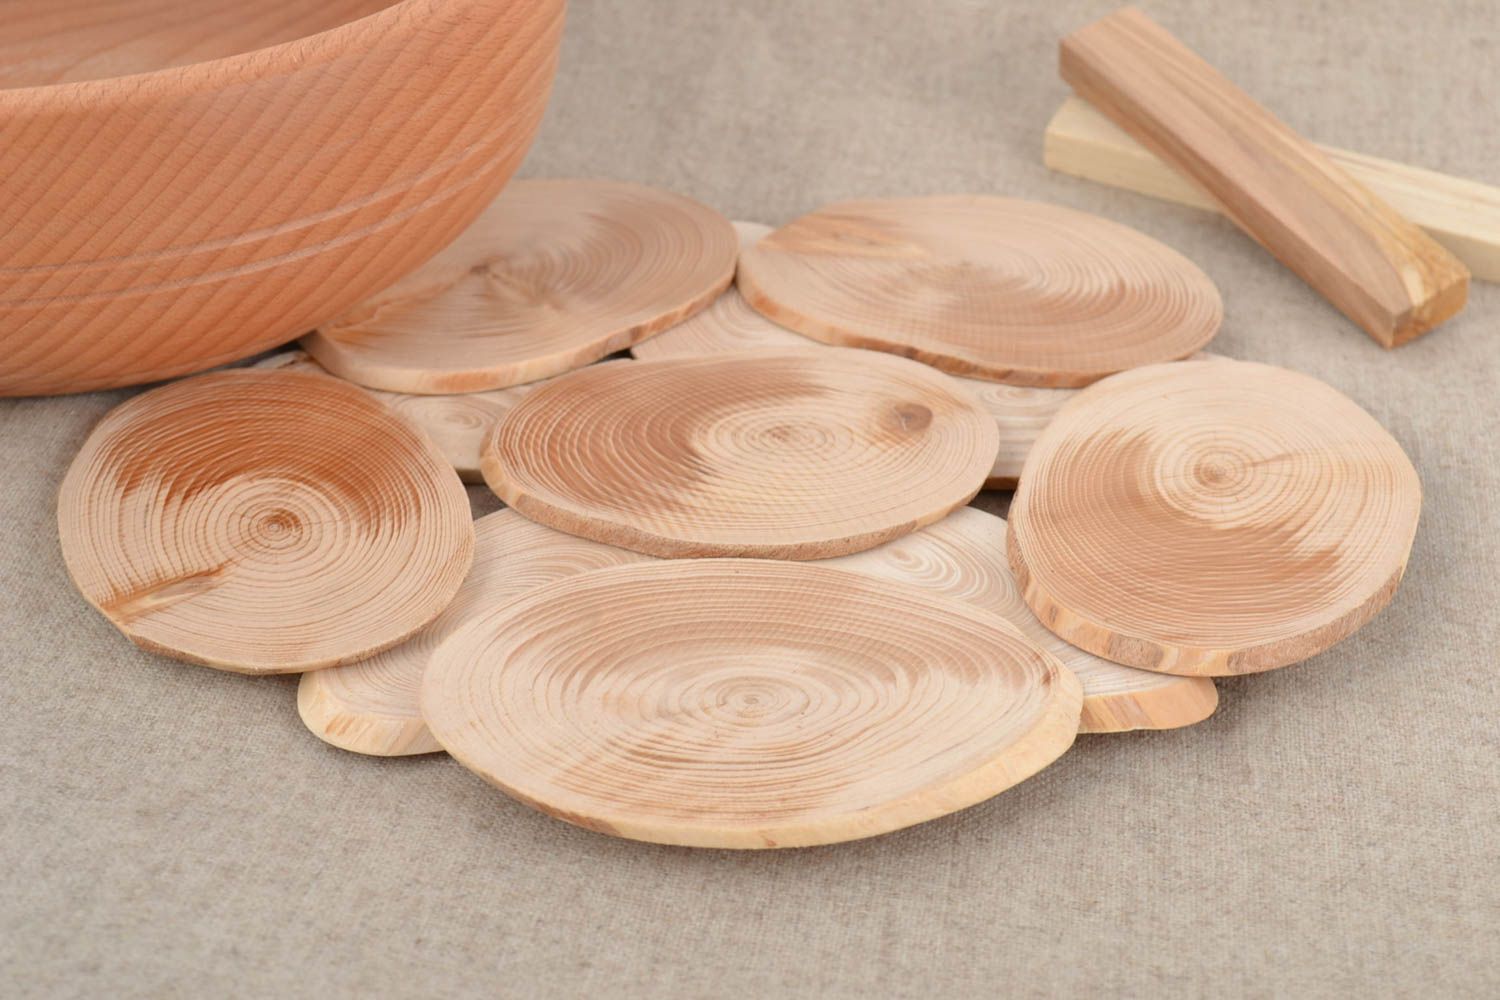 Handmade wooden round stand for pots and other hot dishes interior decor ideas photo 1